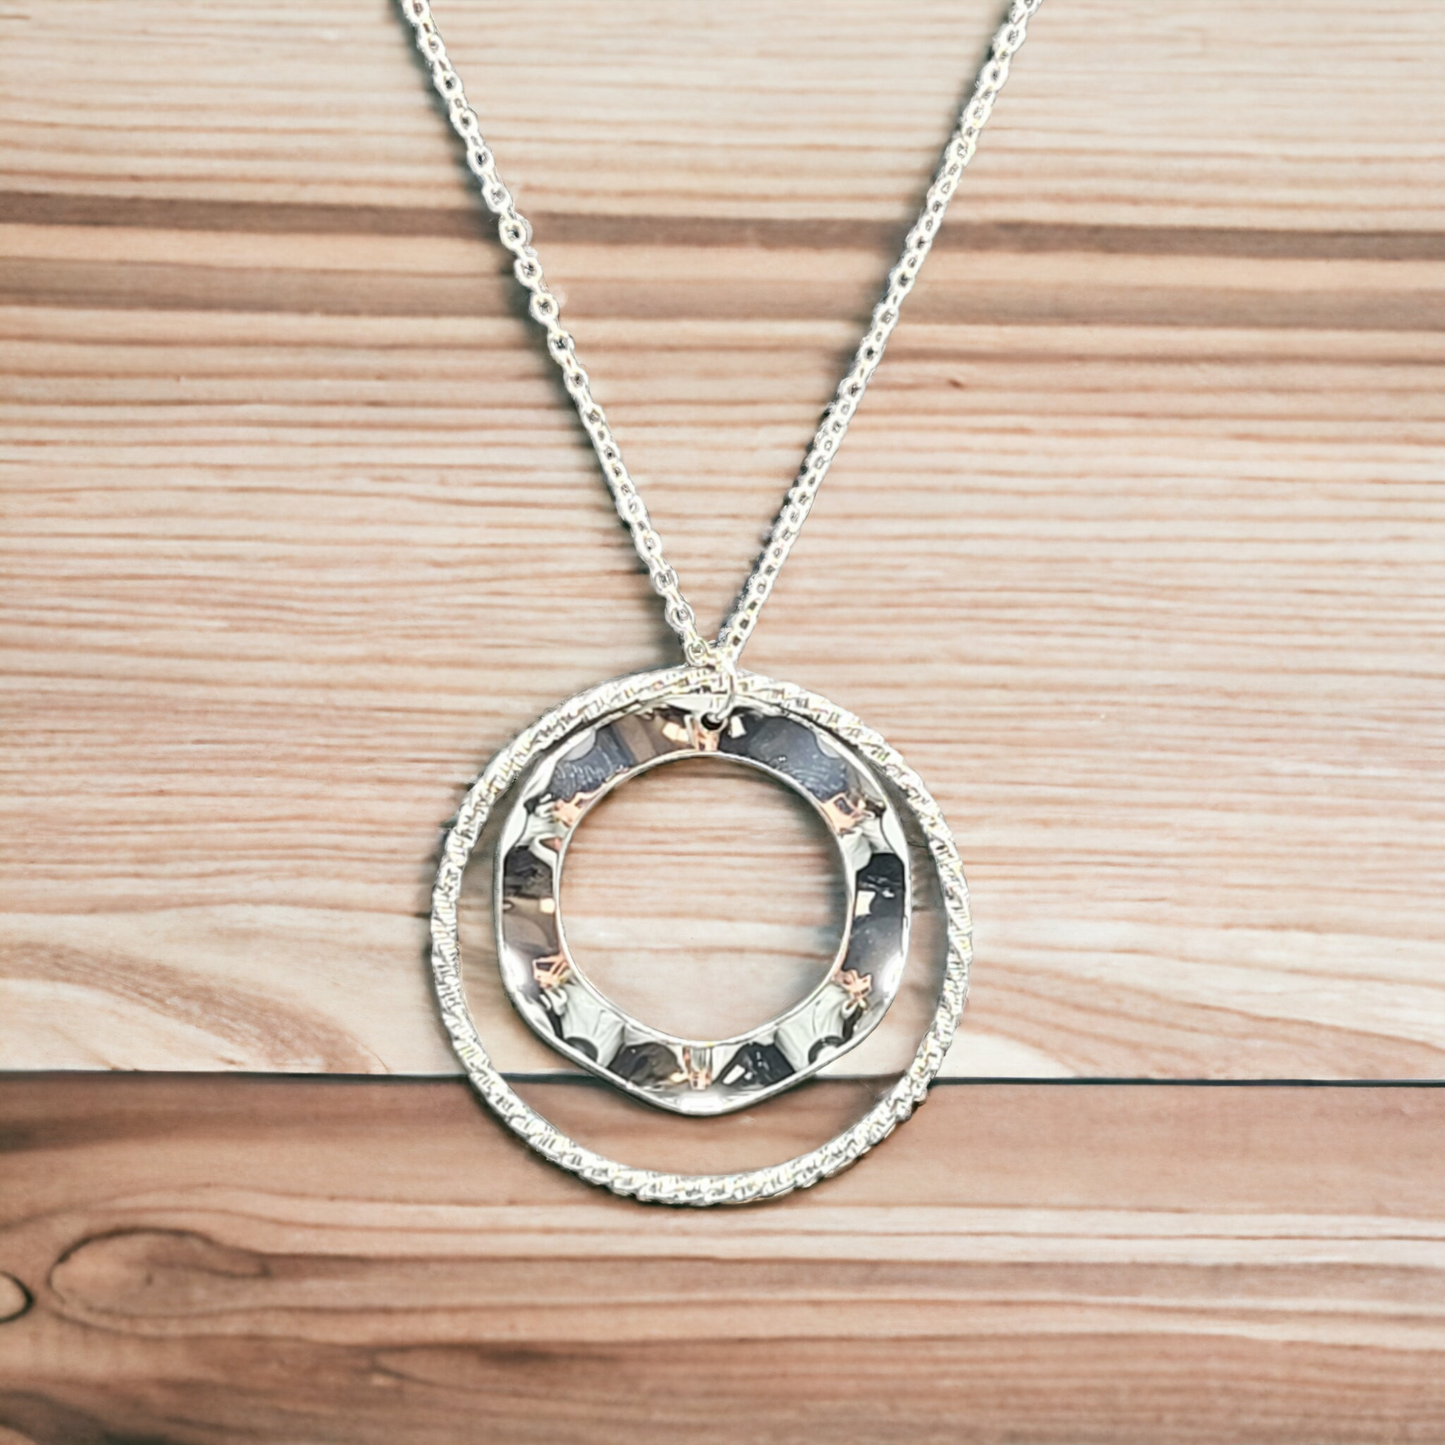 Silver relic necklace set